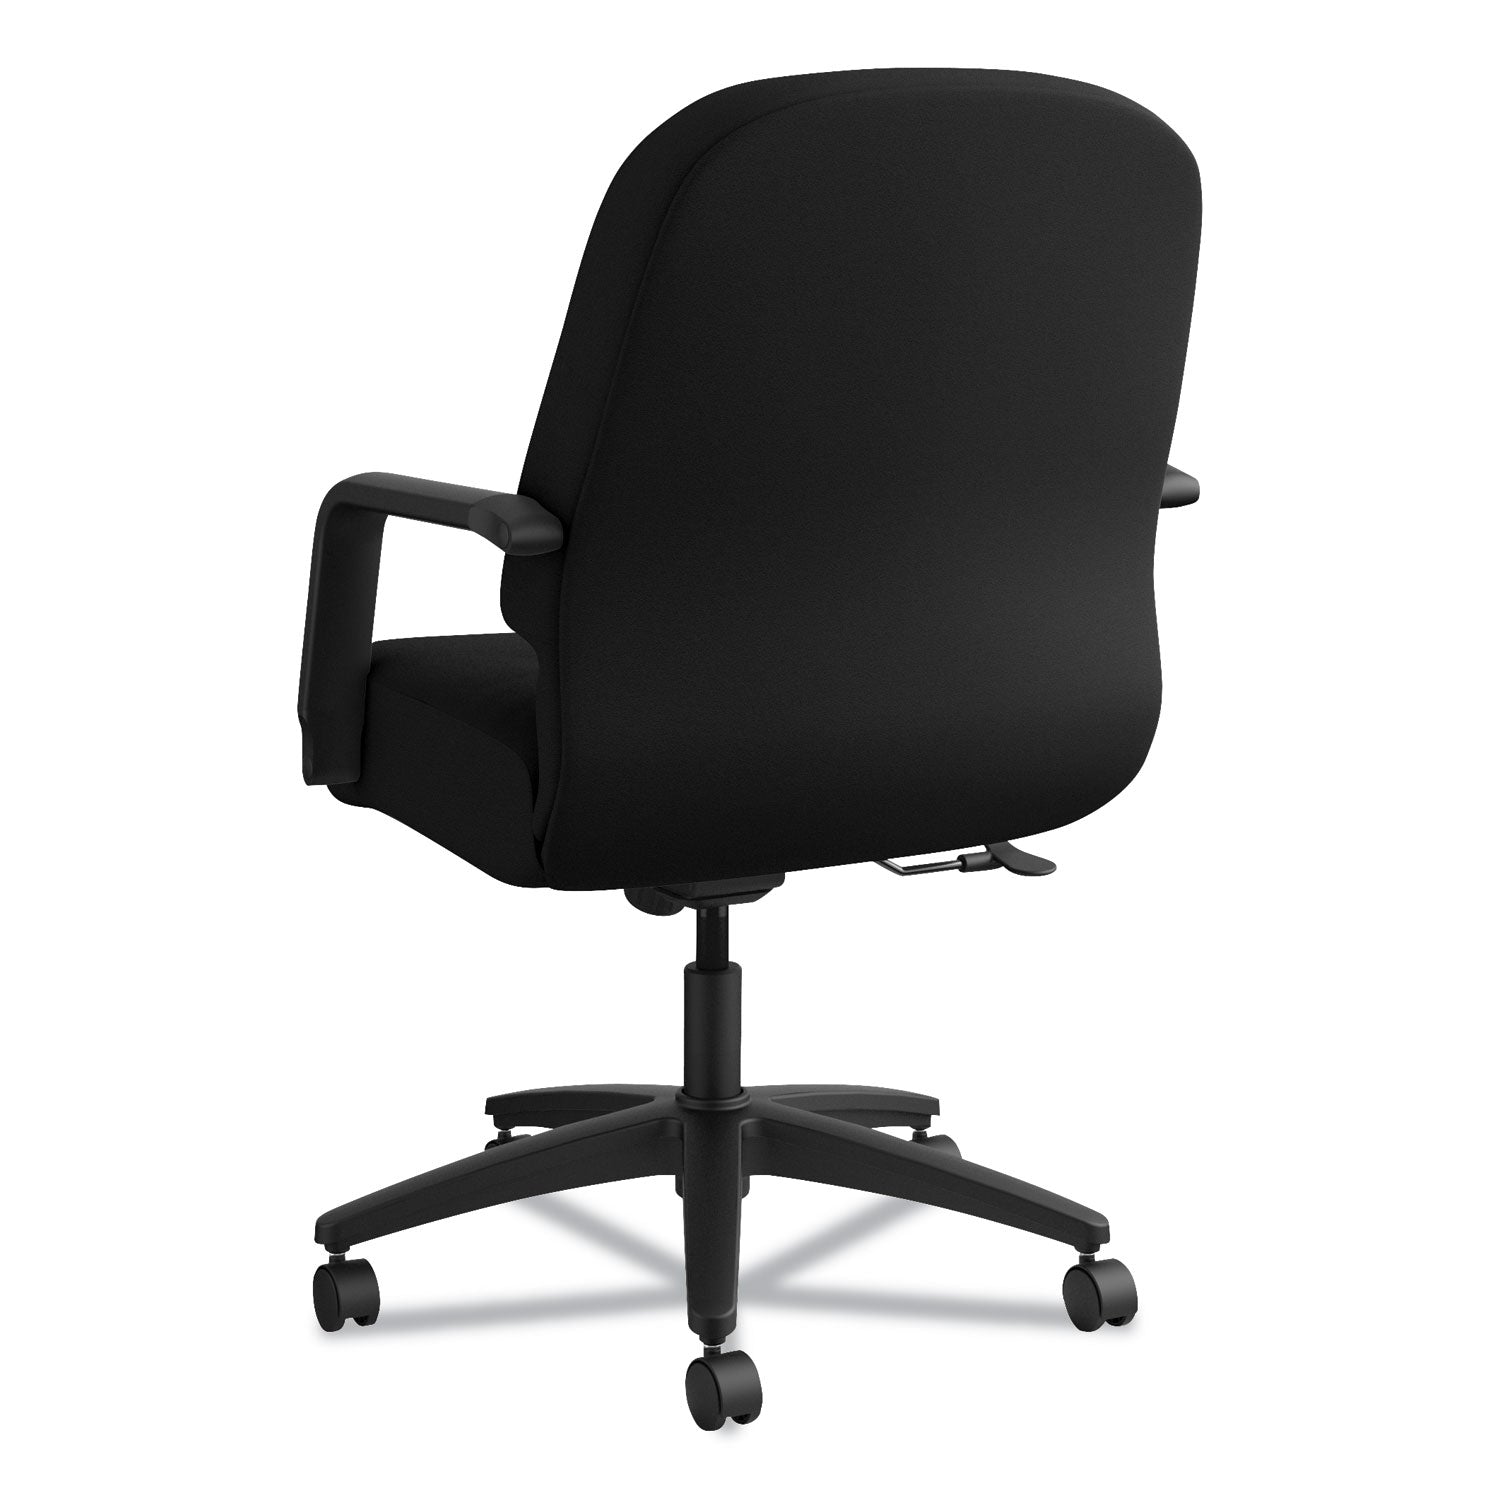 pillow-soft-2090-series-managerial-mid-back-swivel-tilt-chair-supports-up-to-300-lb-17-to-21-seat-height-black_hon2092cu10t - 8